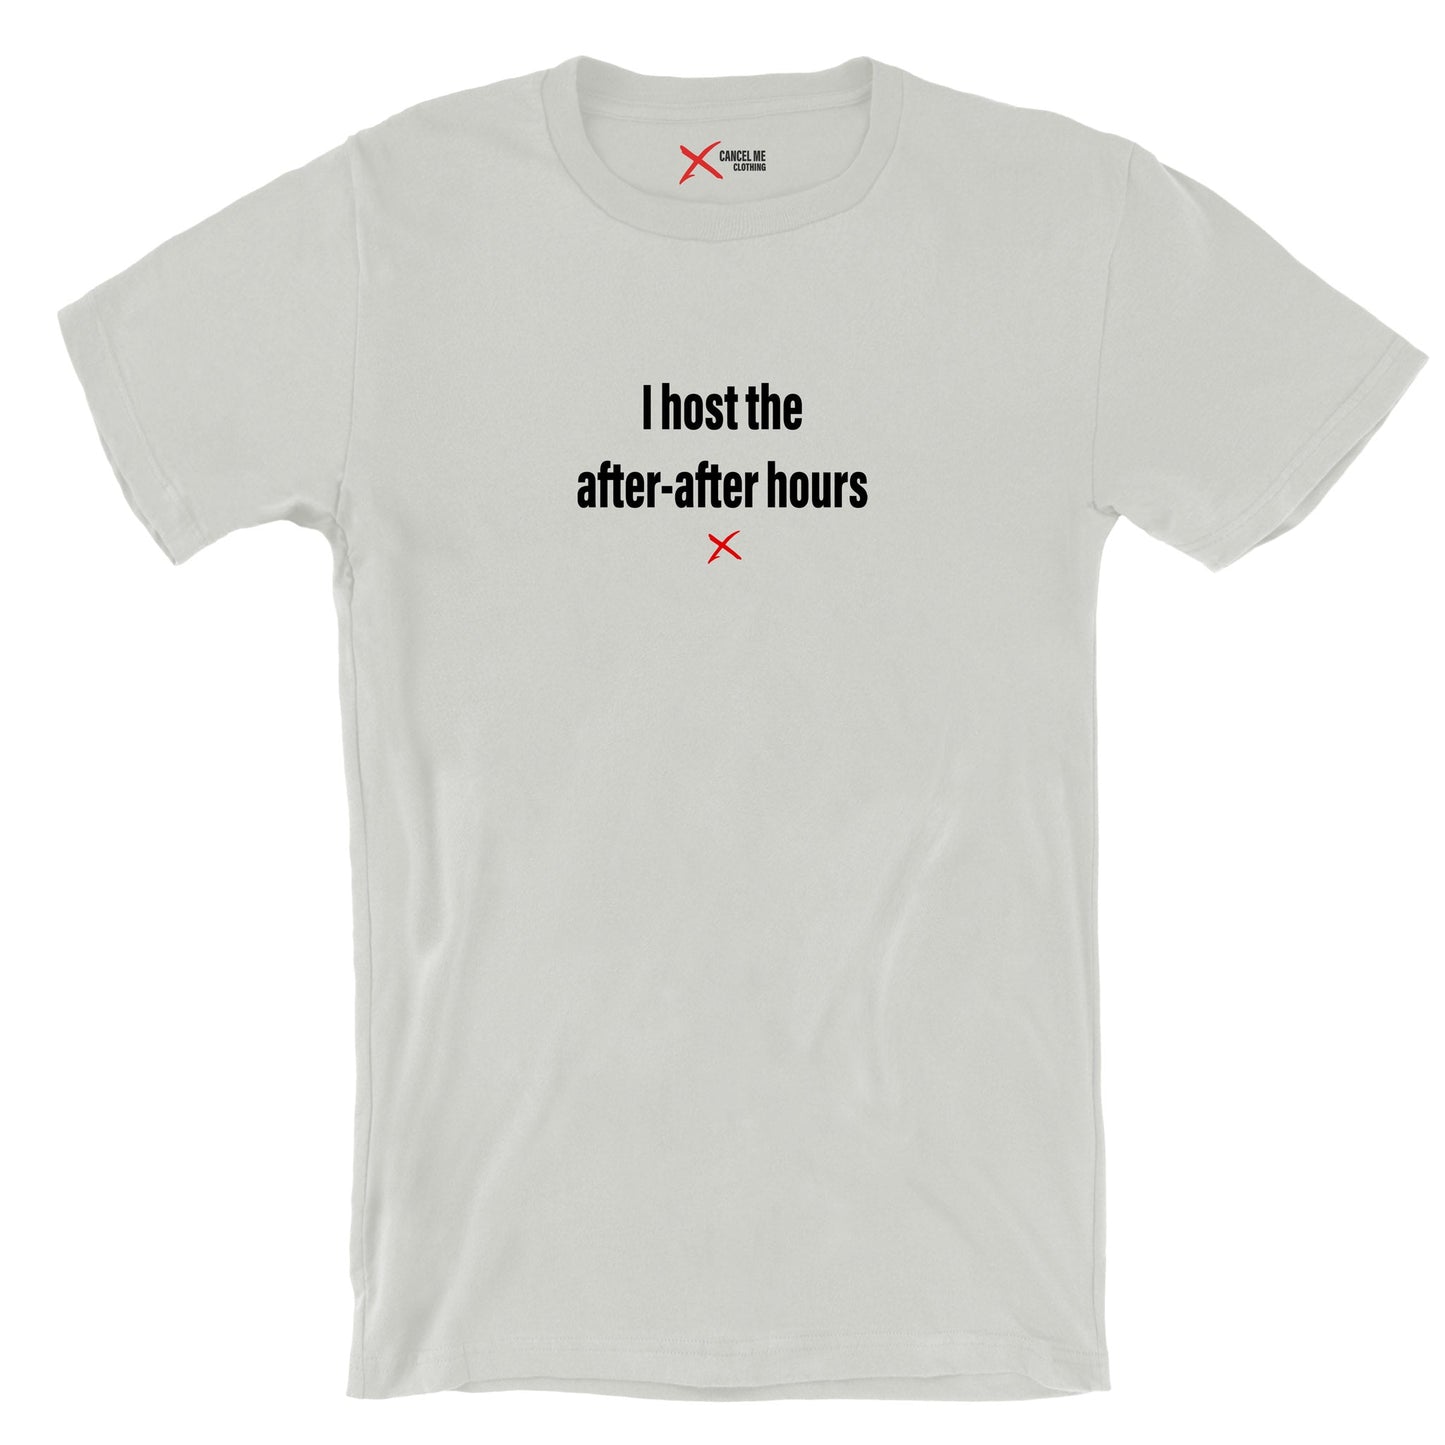 I host the after-after hours - Shirt